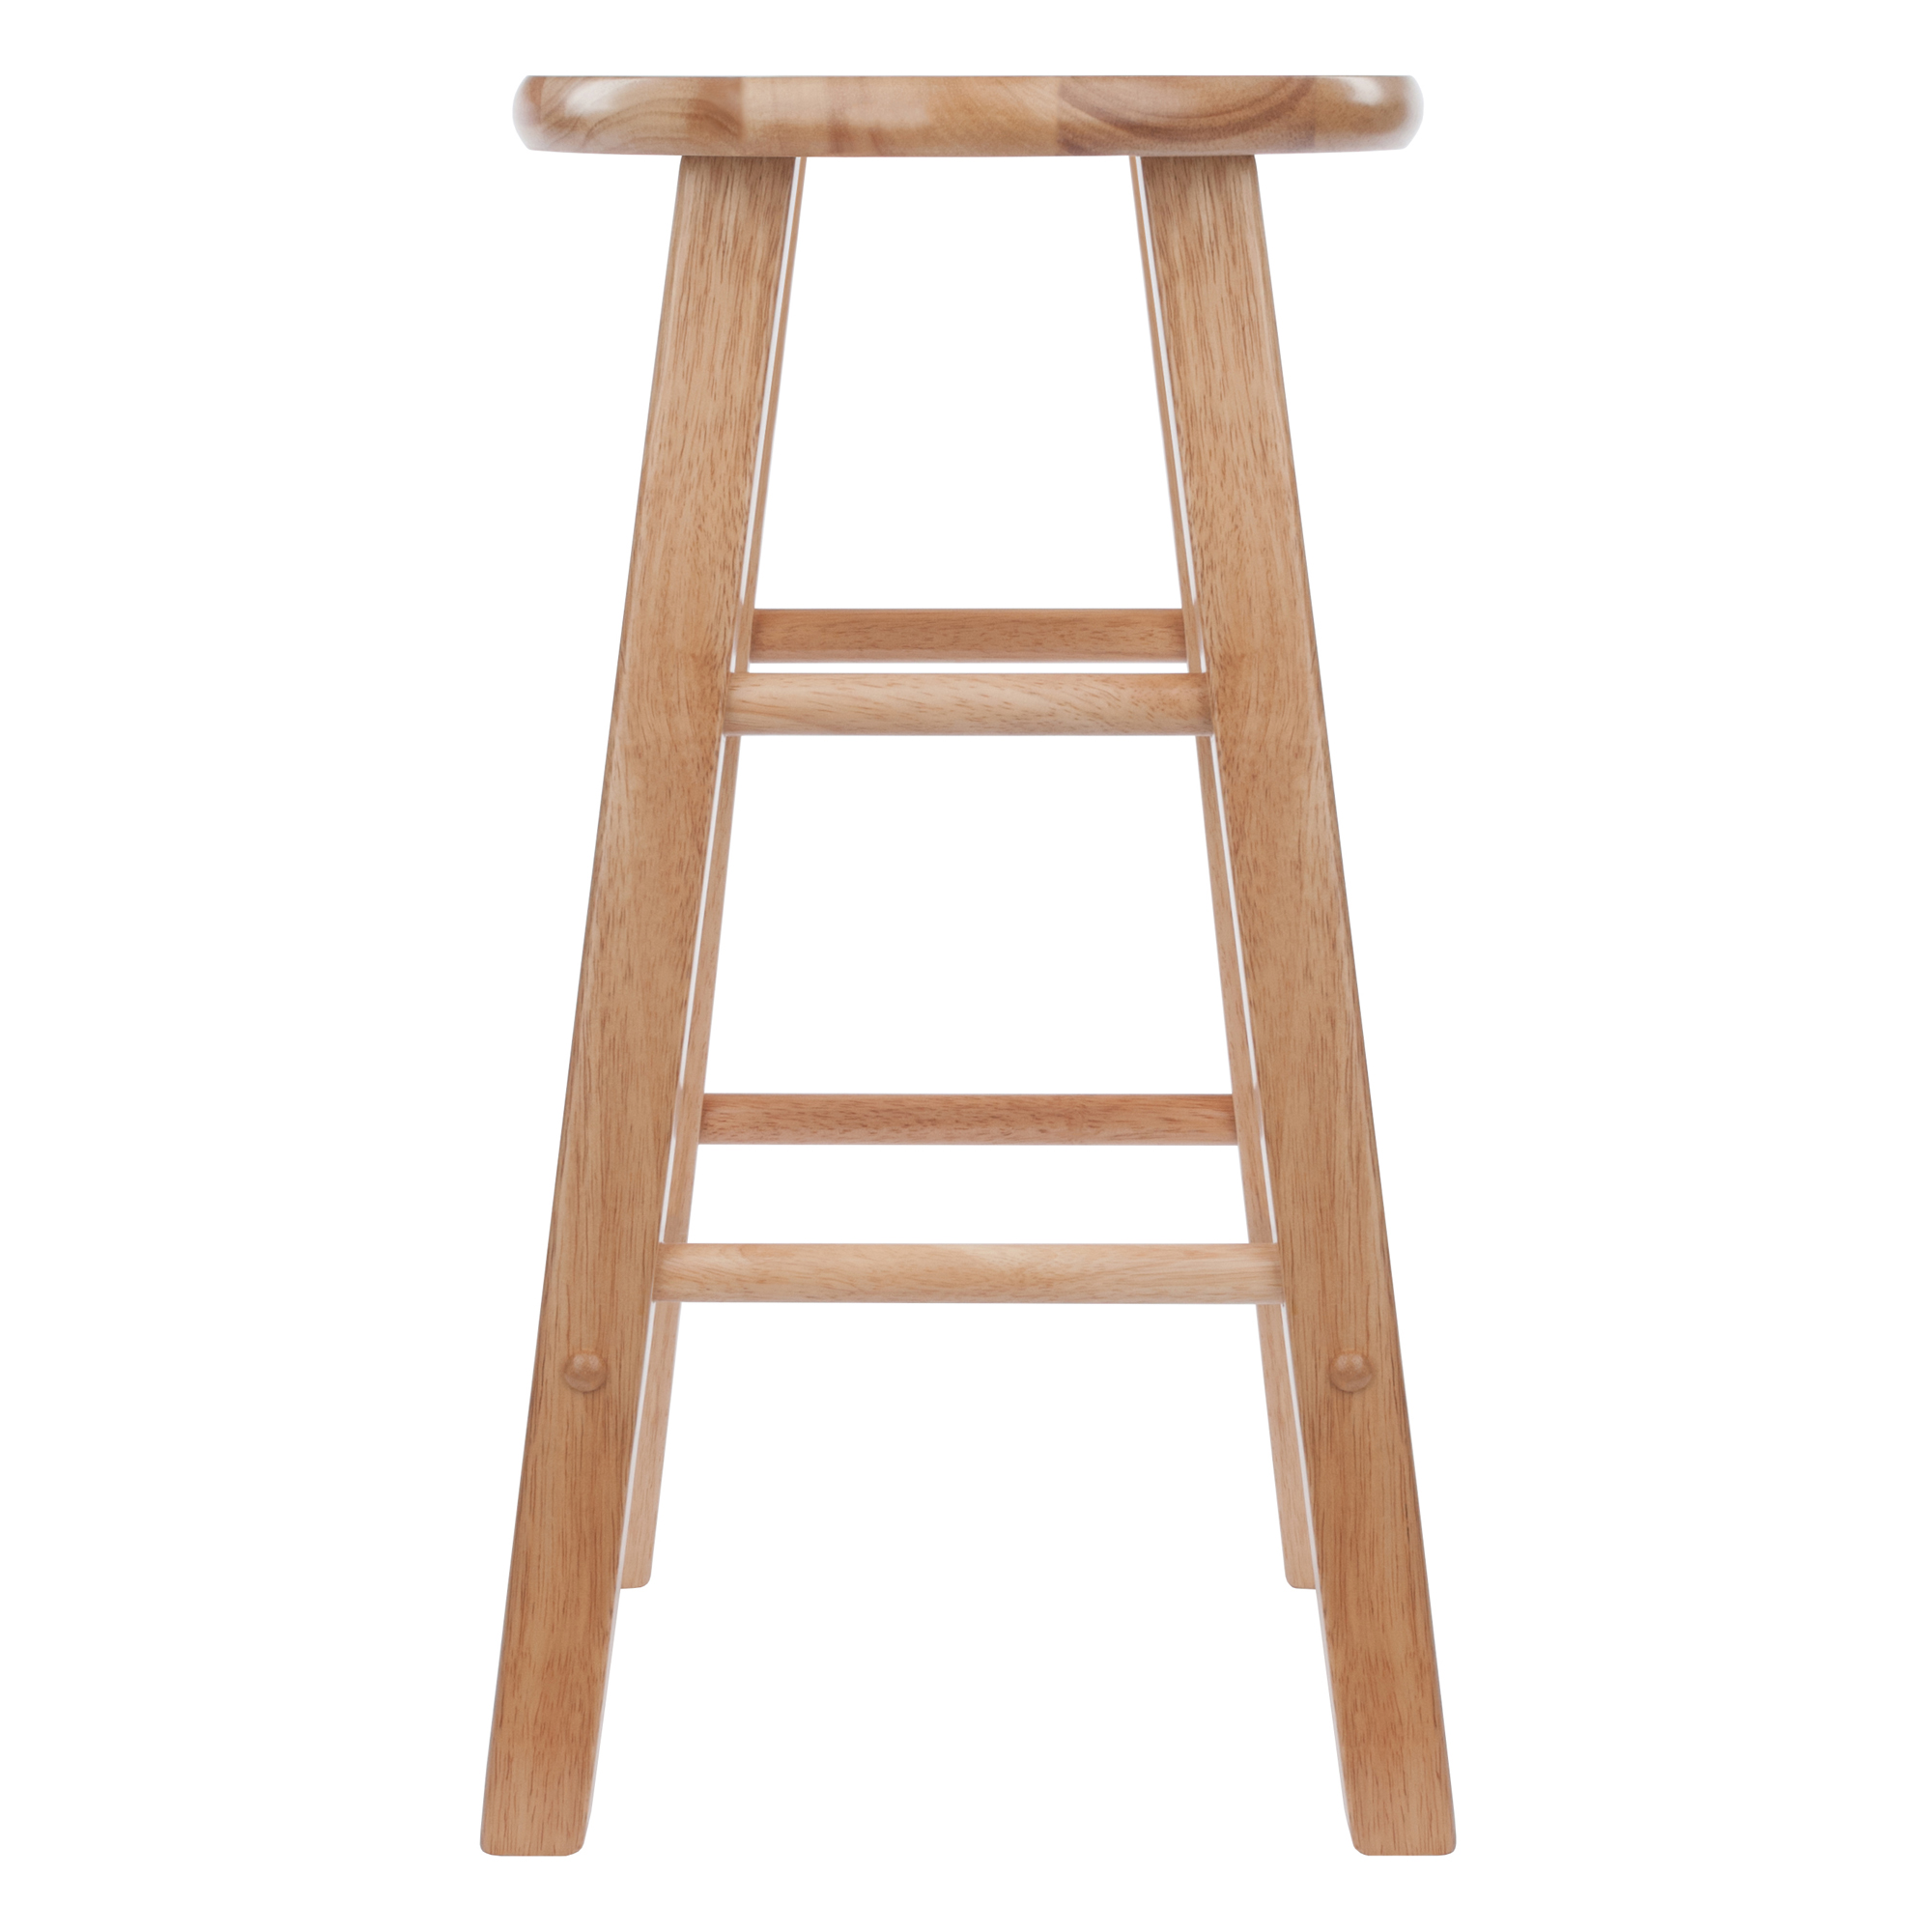 Winsome Wood Element 2-Piece Counter Stools, Natural Finish - image 4 of 8